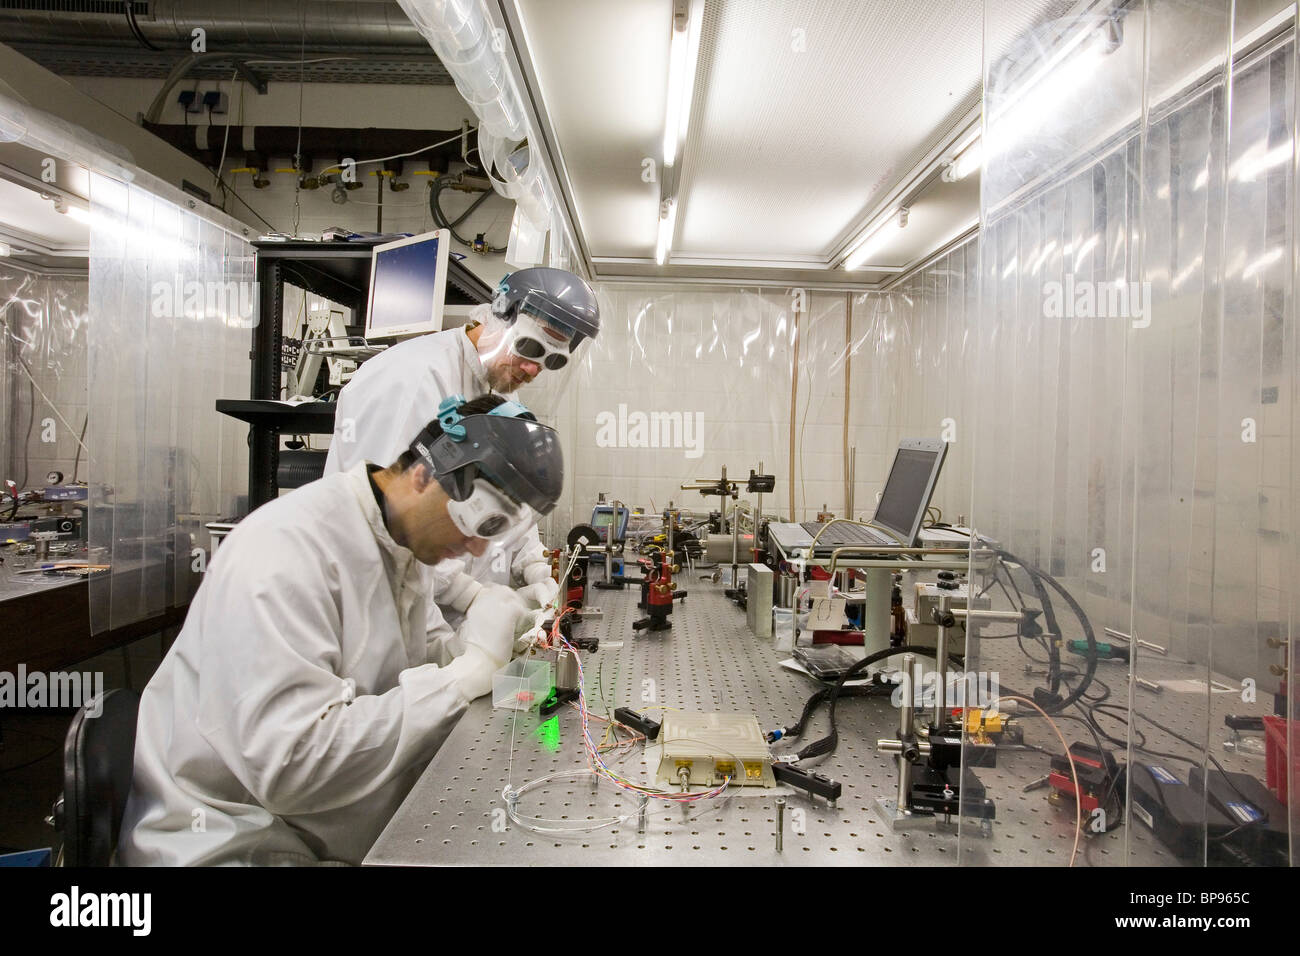 Laser centre, research scientists in protective clothing, laboratory, Hanover, Lower Saxony, Germany Stock Photo